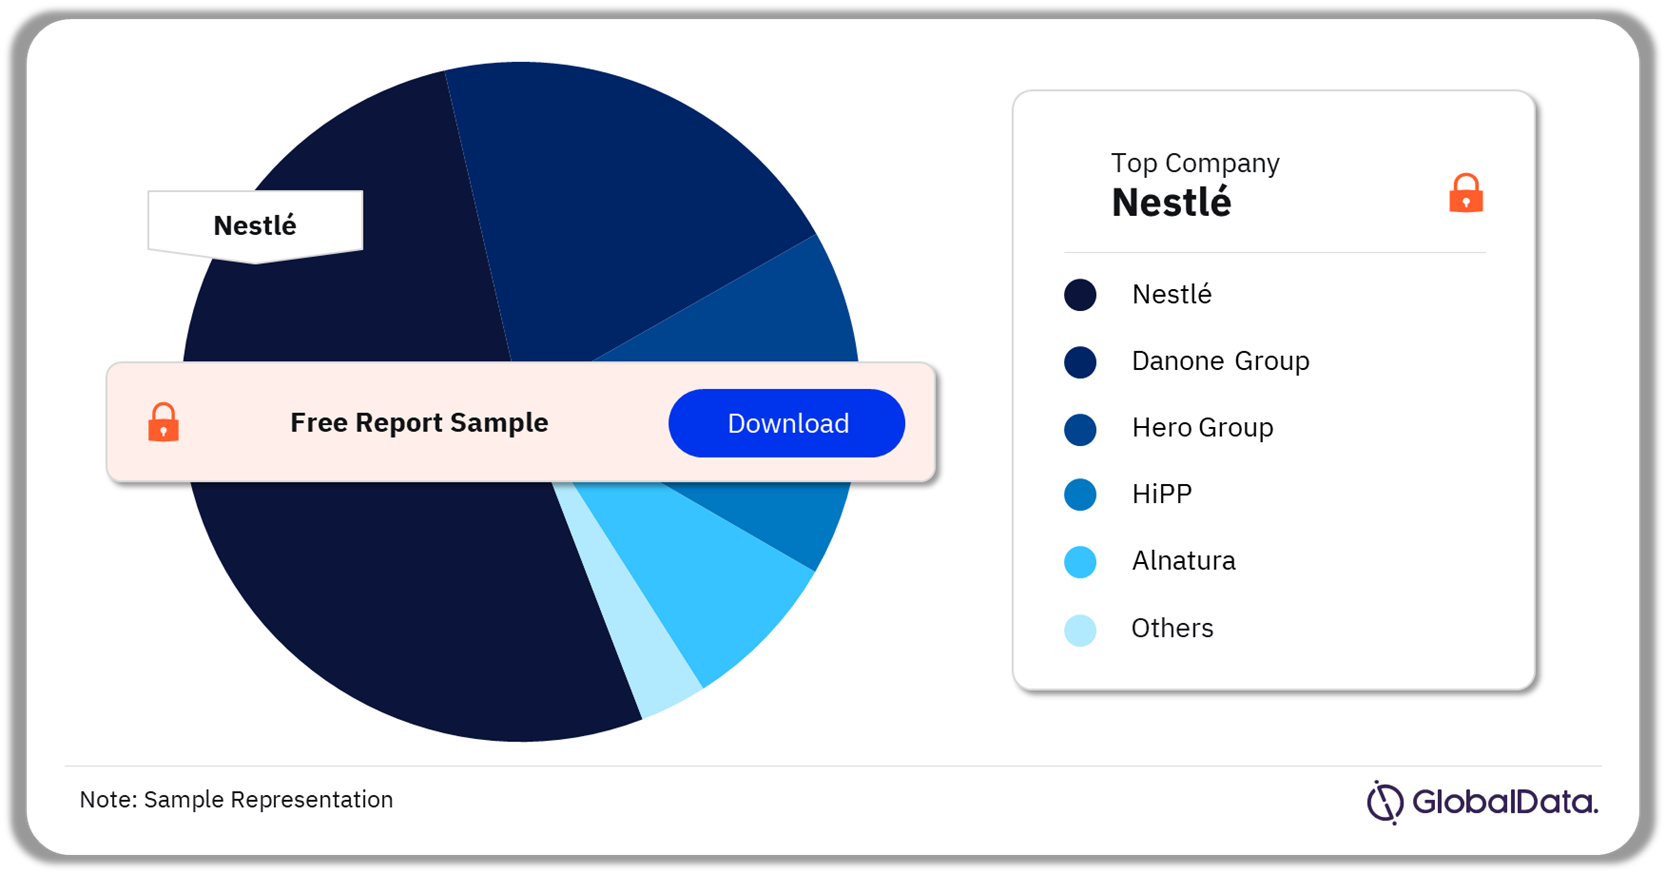 Nestlé was the leading Swiss baby food manufacturer in 2021